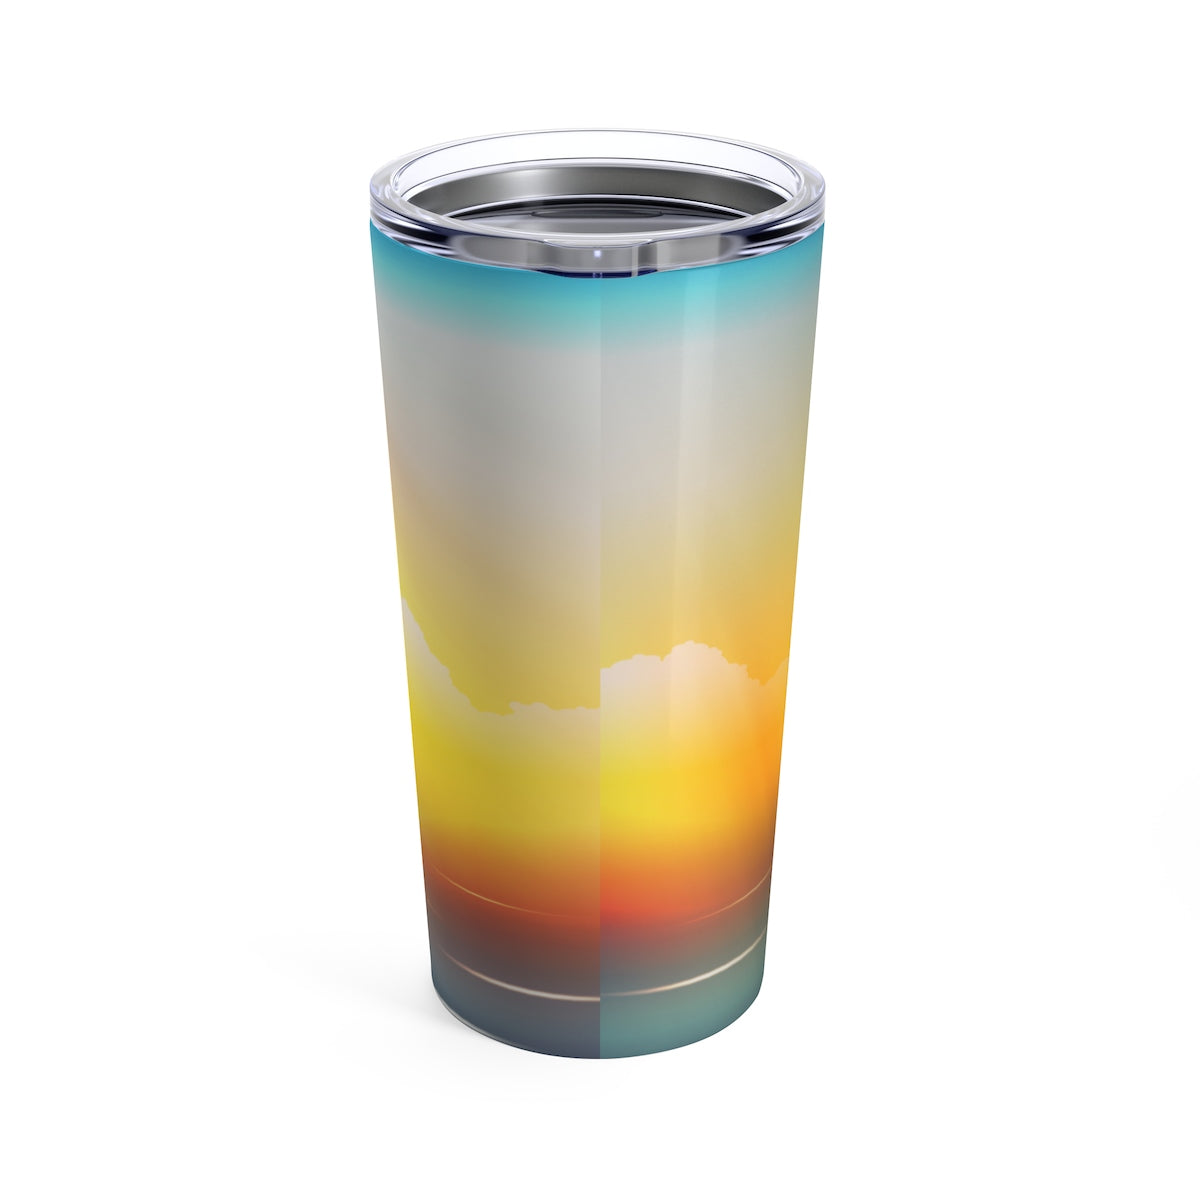 Limited Edition Coastal Life 20 oz Stainless Steel Tumbler FIND YOUR COAST  CO